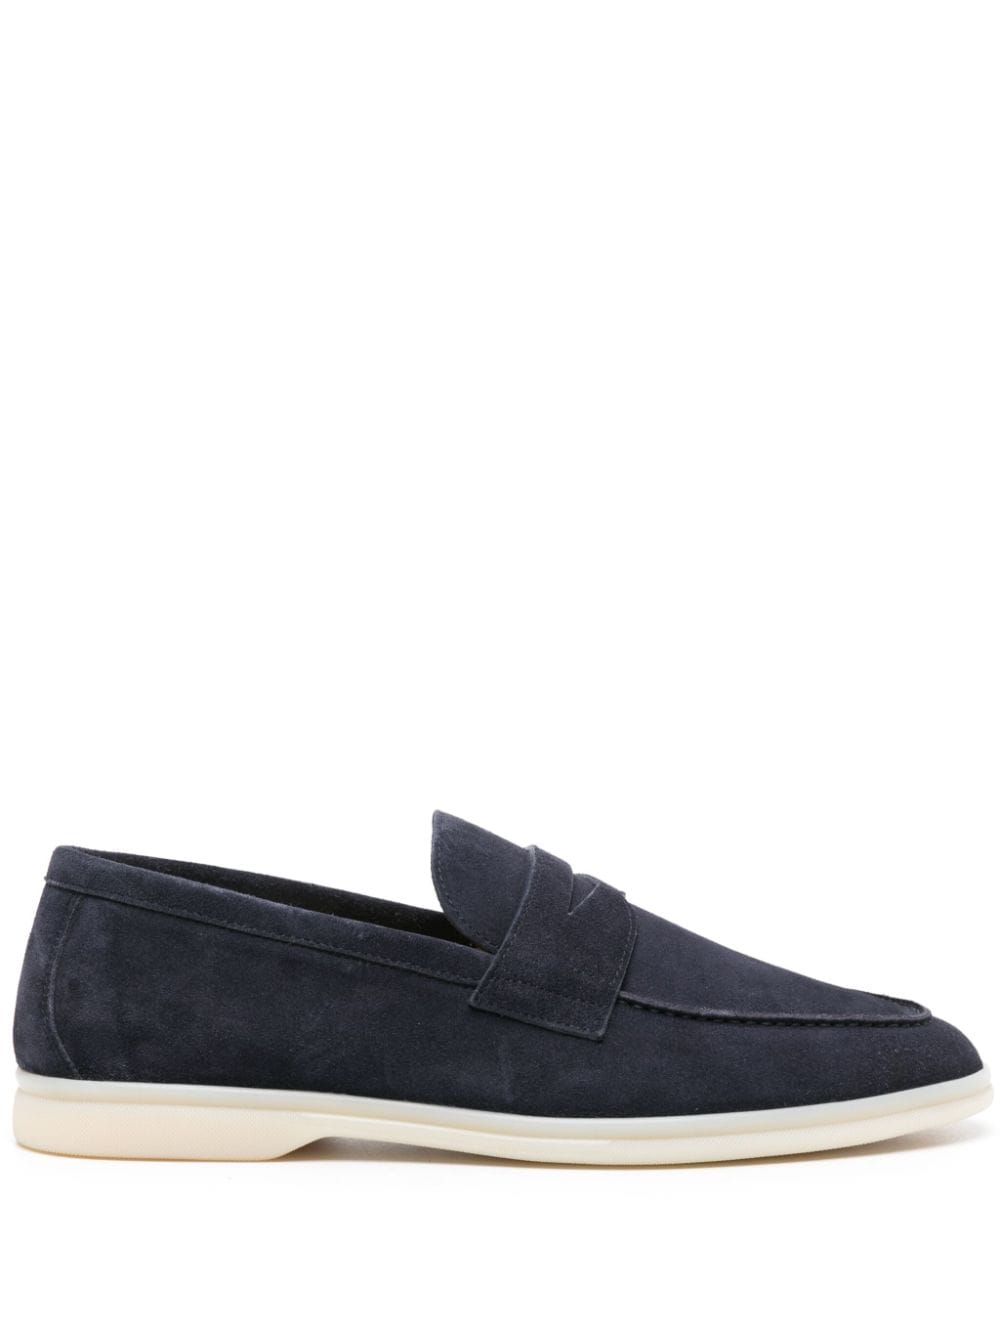 Scarosso Luciano suede penny loafers - Blue von Scarosso